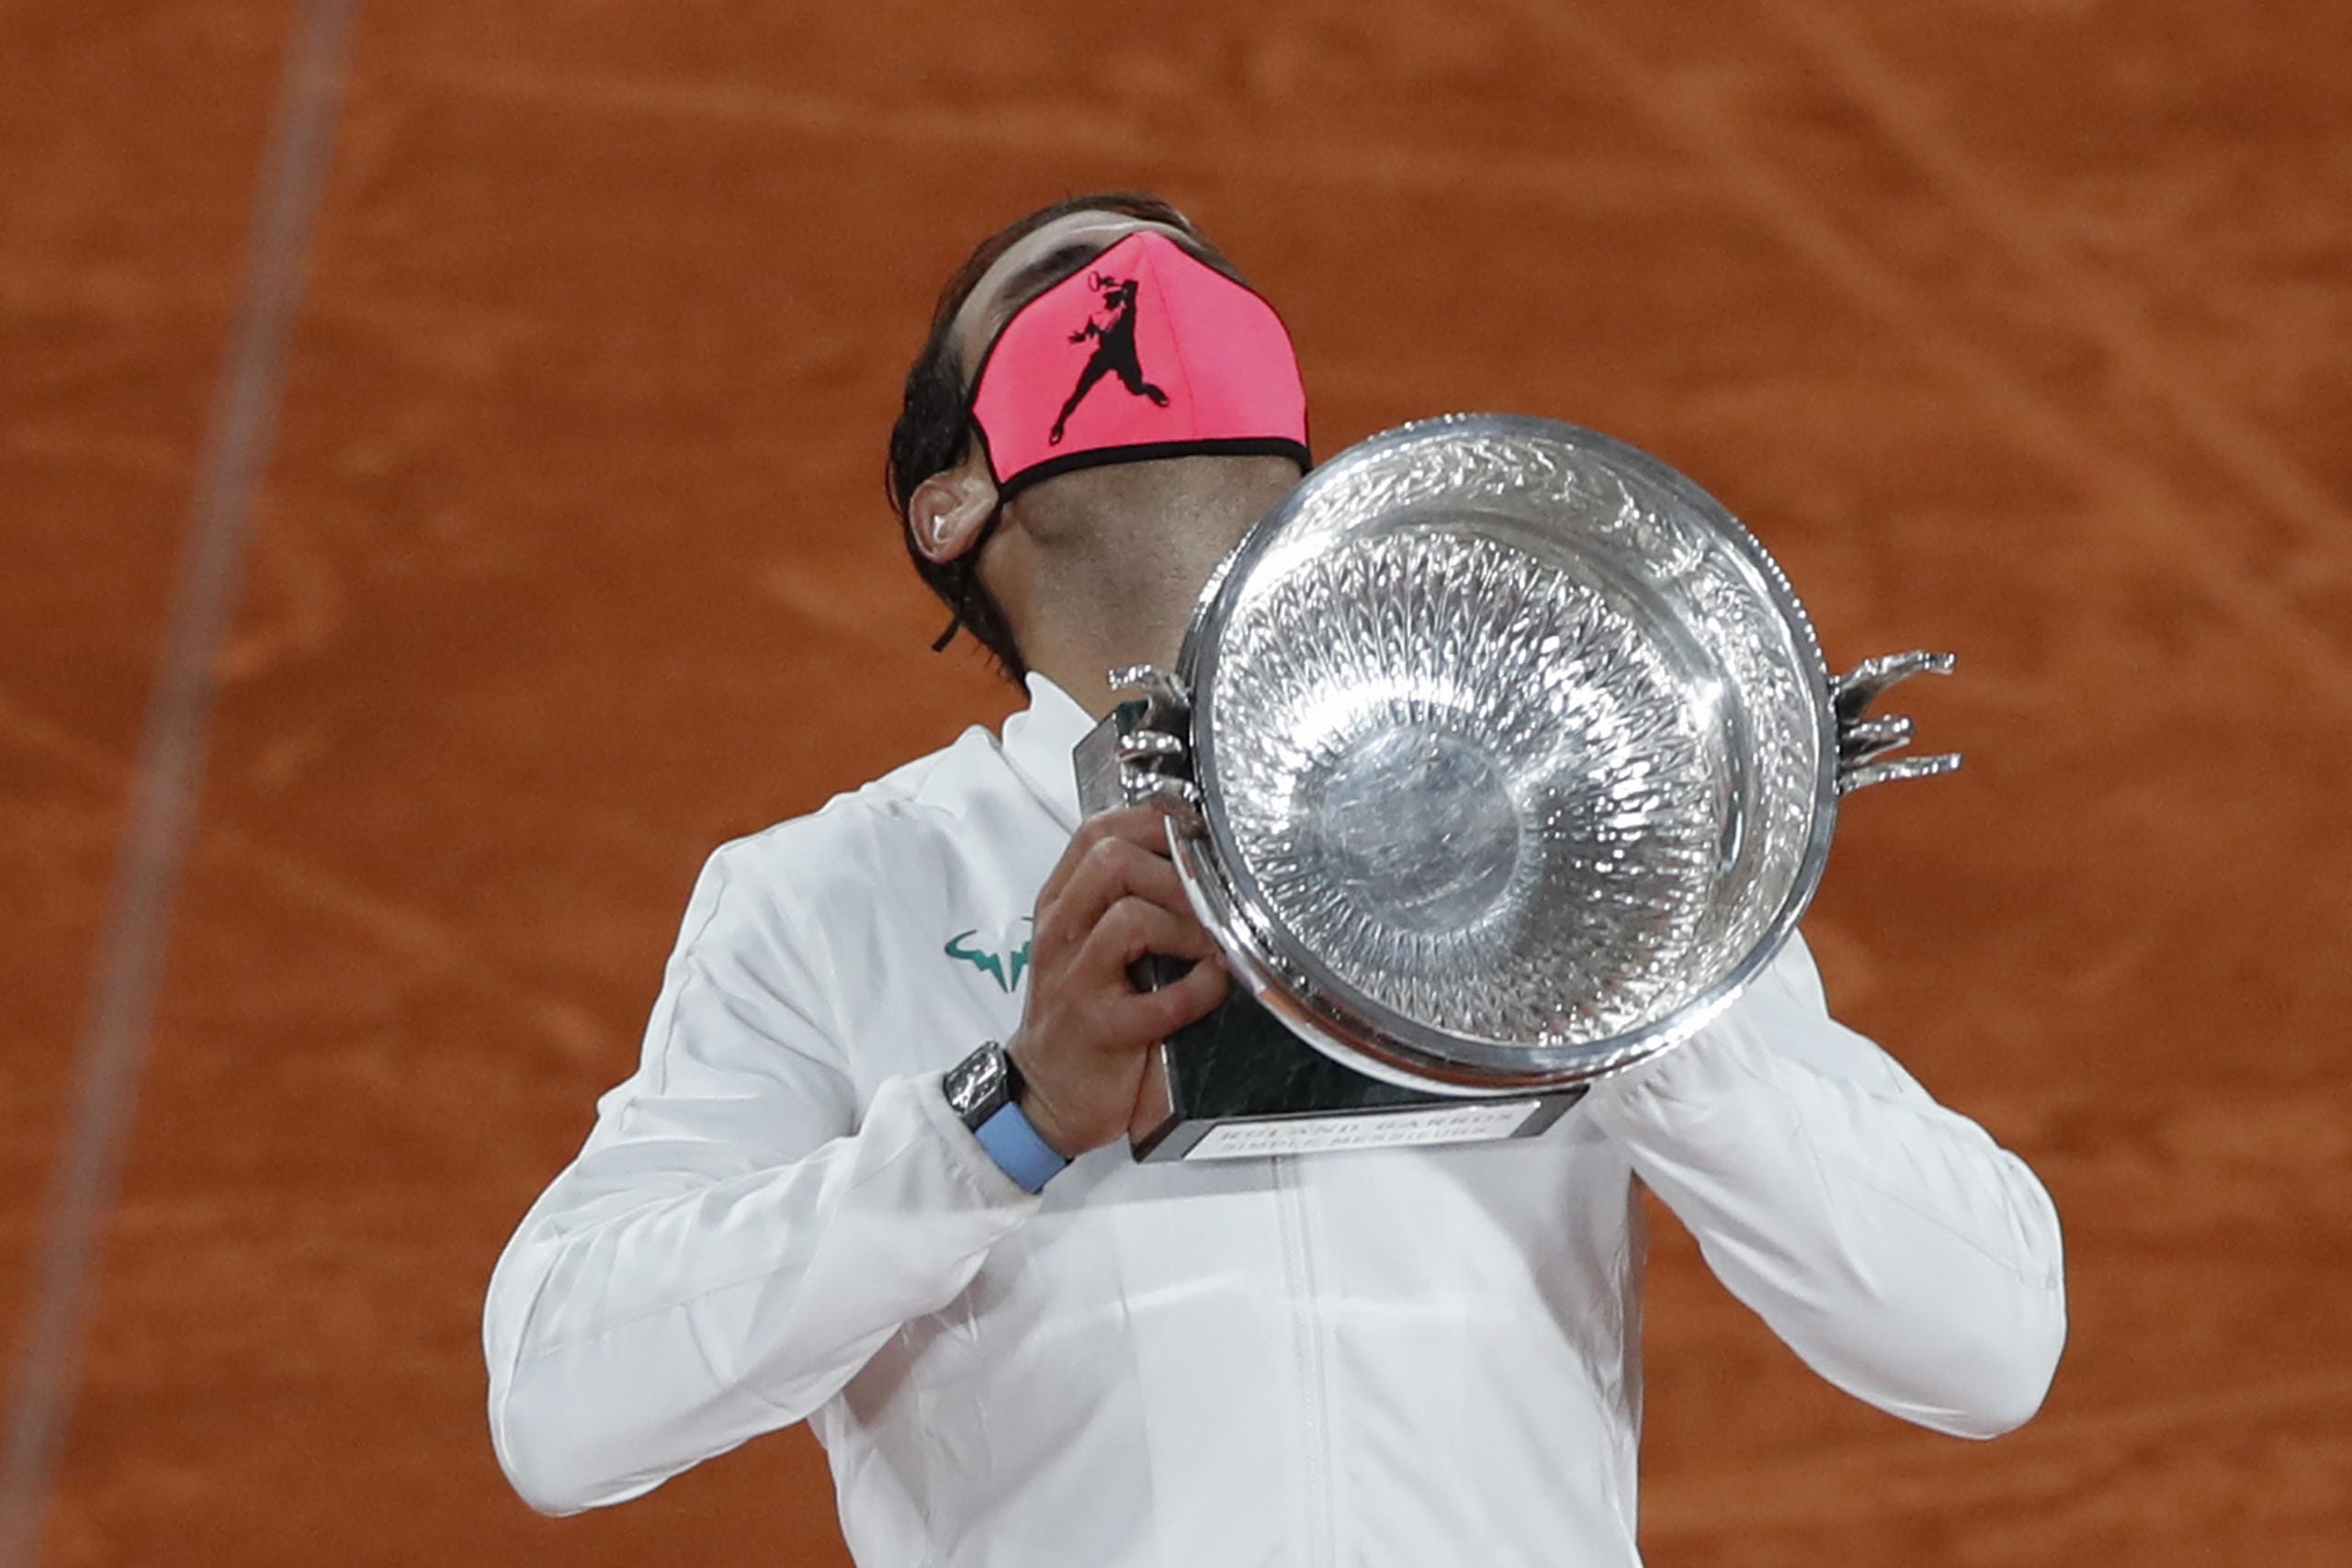 Spain's Rafael Nadal holds the trophy as he celebrates winning the final match of the French Open tennis tournament against Serbia's Novak Djokovic in three sets, 6-0, 6-2, 7-5, at the Roland Garros stadium in Paris, France, Sunday, Oct. 11, 2020.